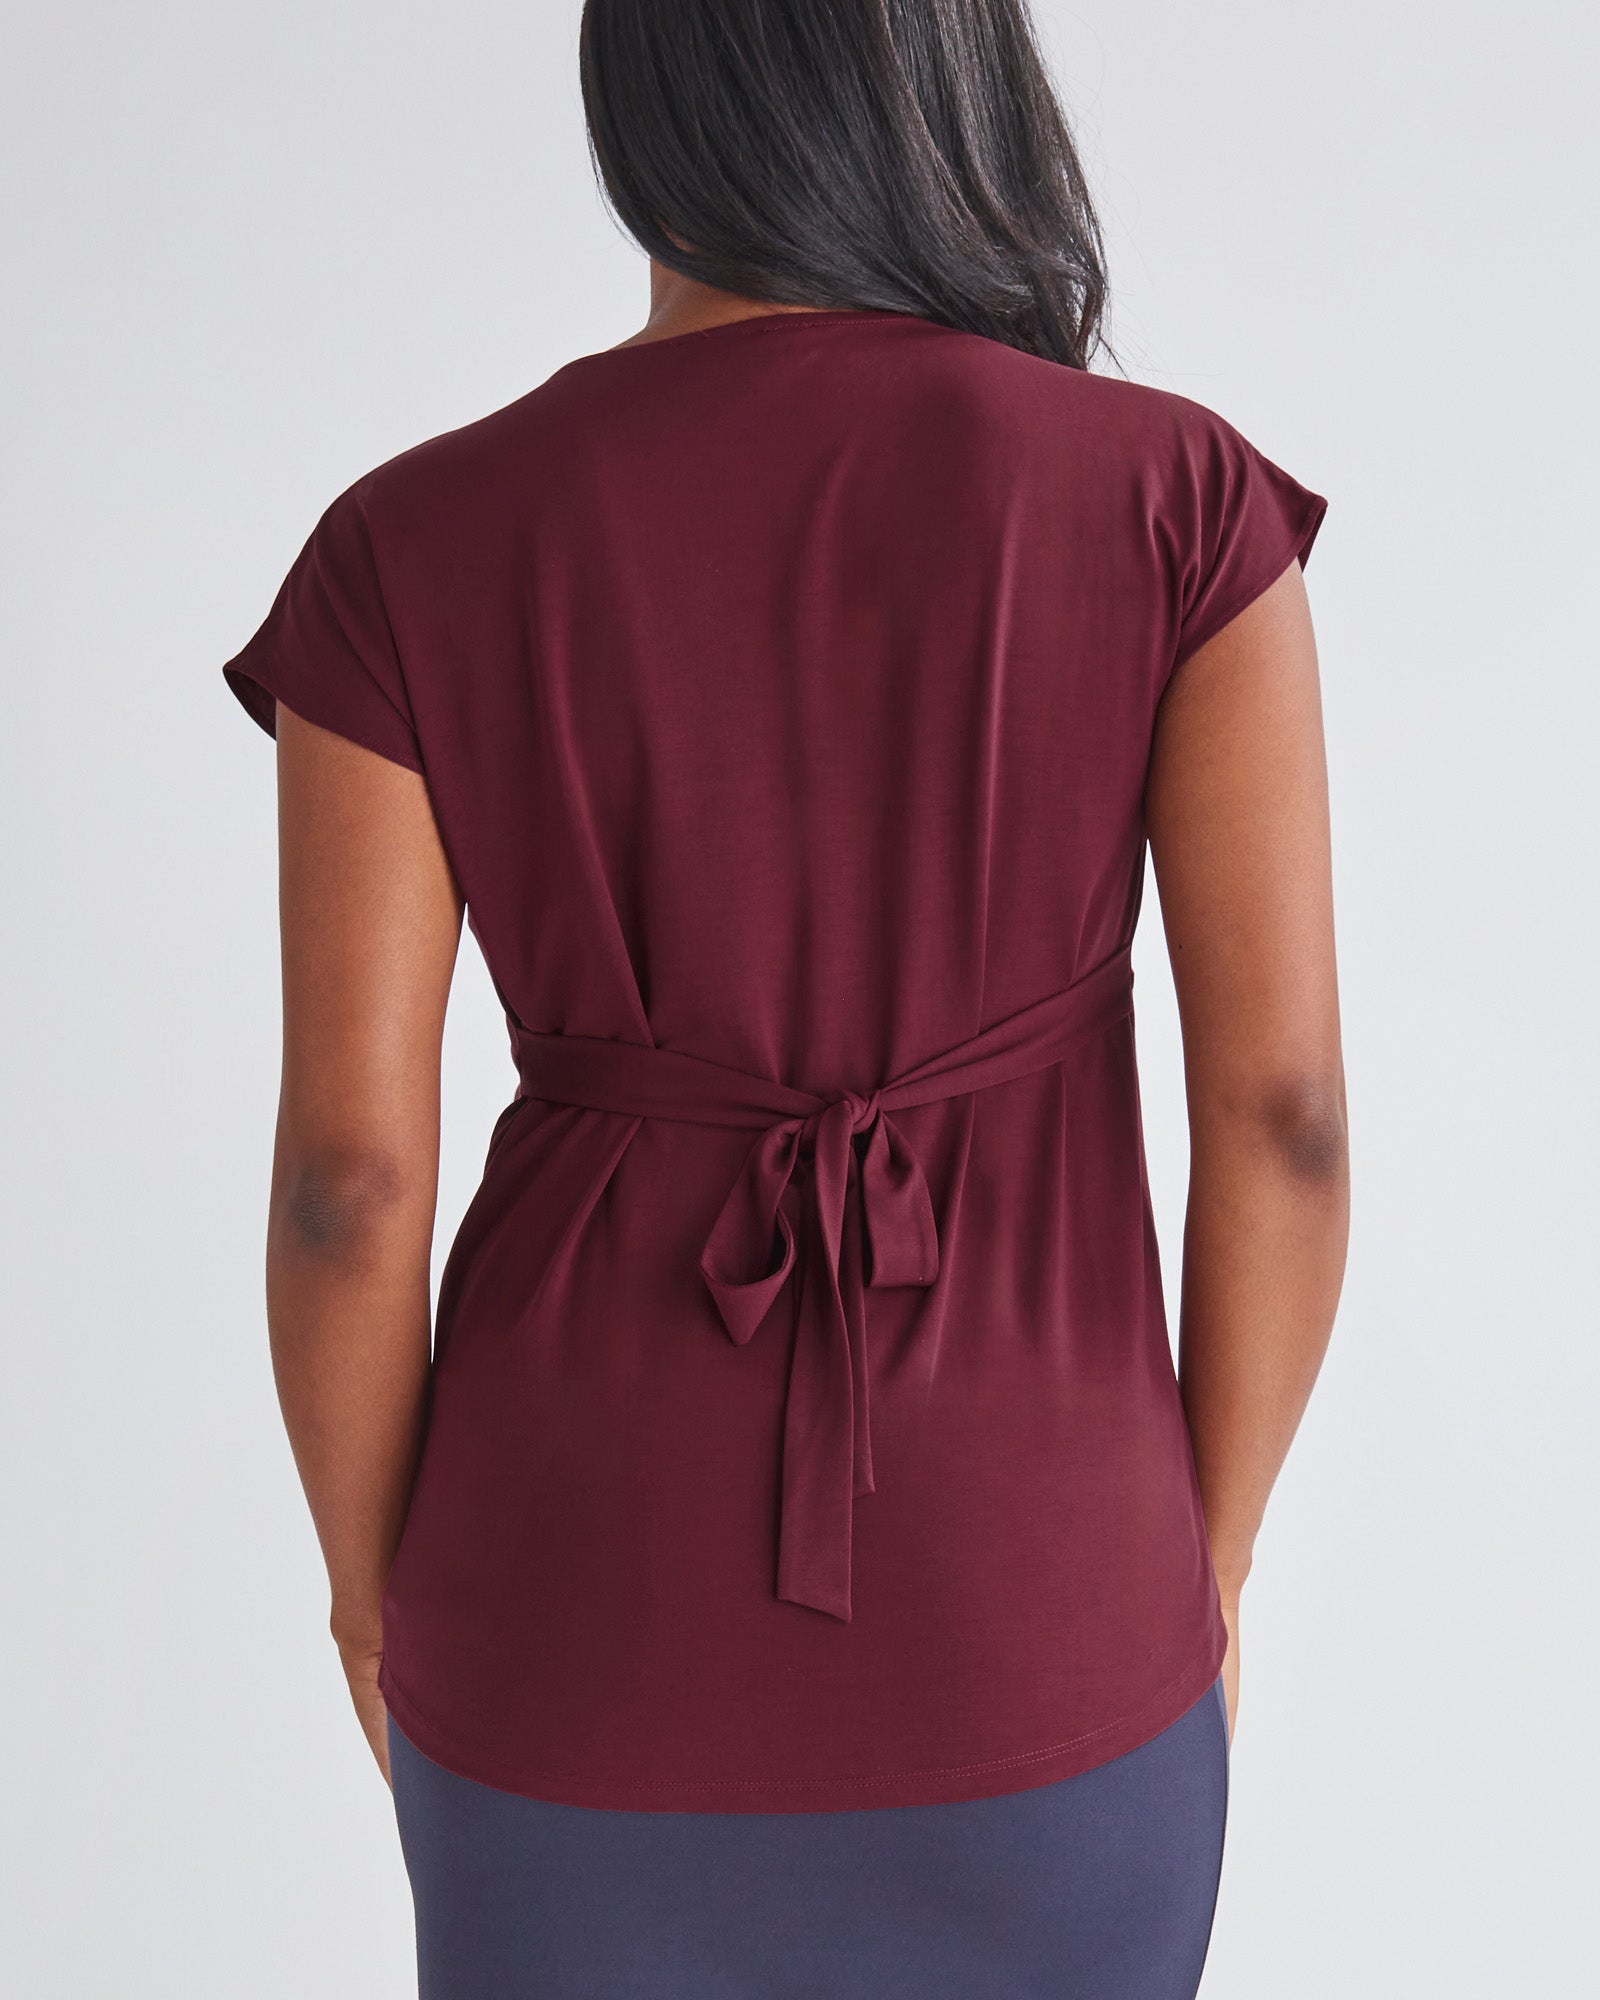 Back View - A Pregnannt Woman Wearing Maternity Crossover Burgundy Work Top in from Angel Maternity.